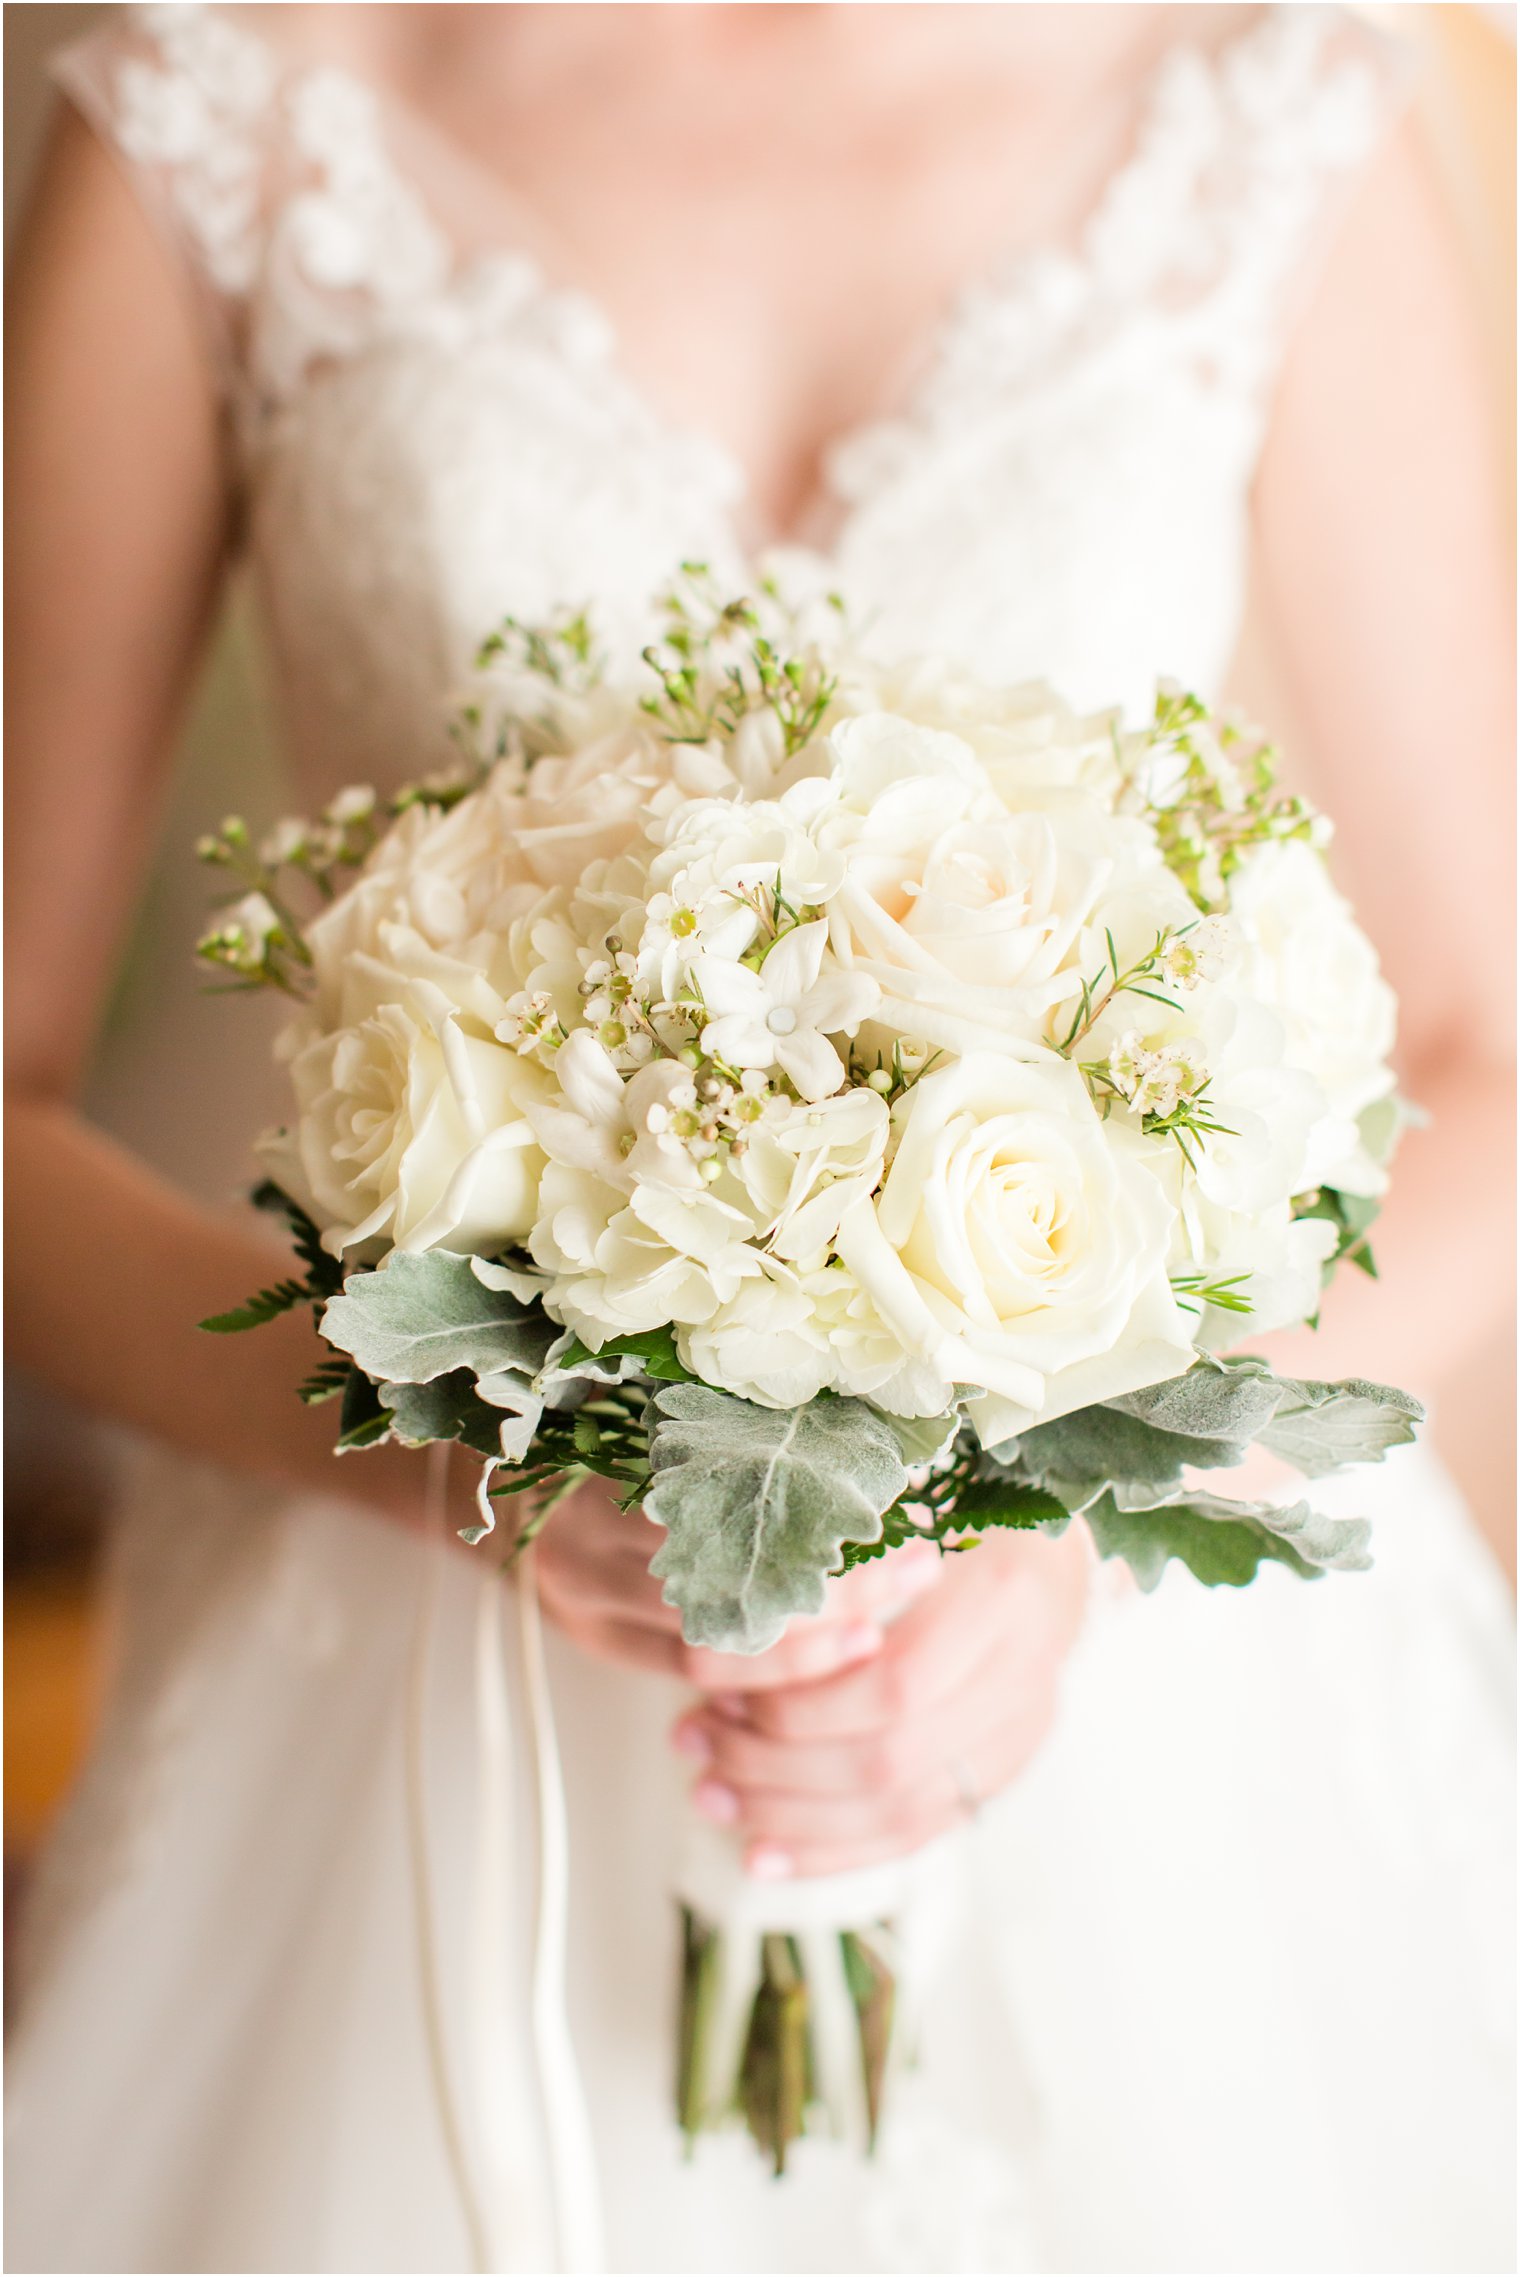 Bouquet with white florals